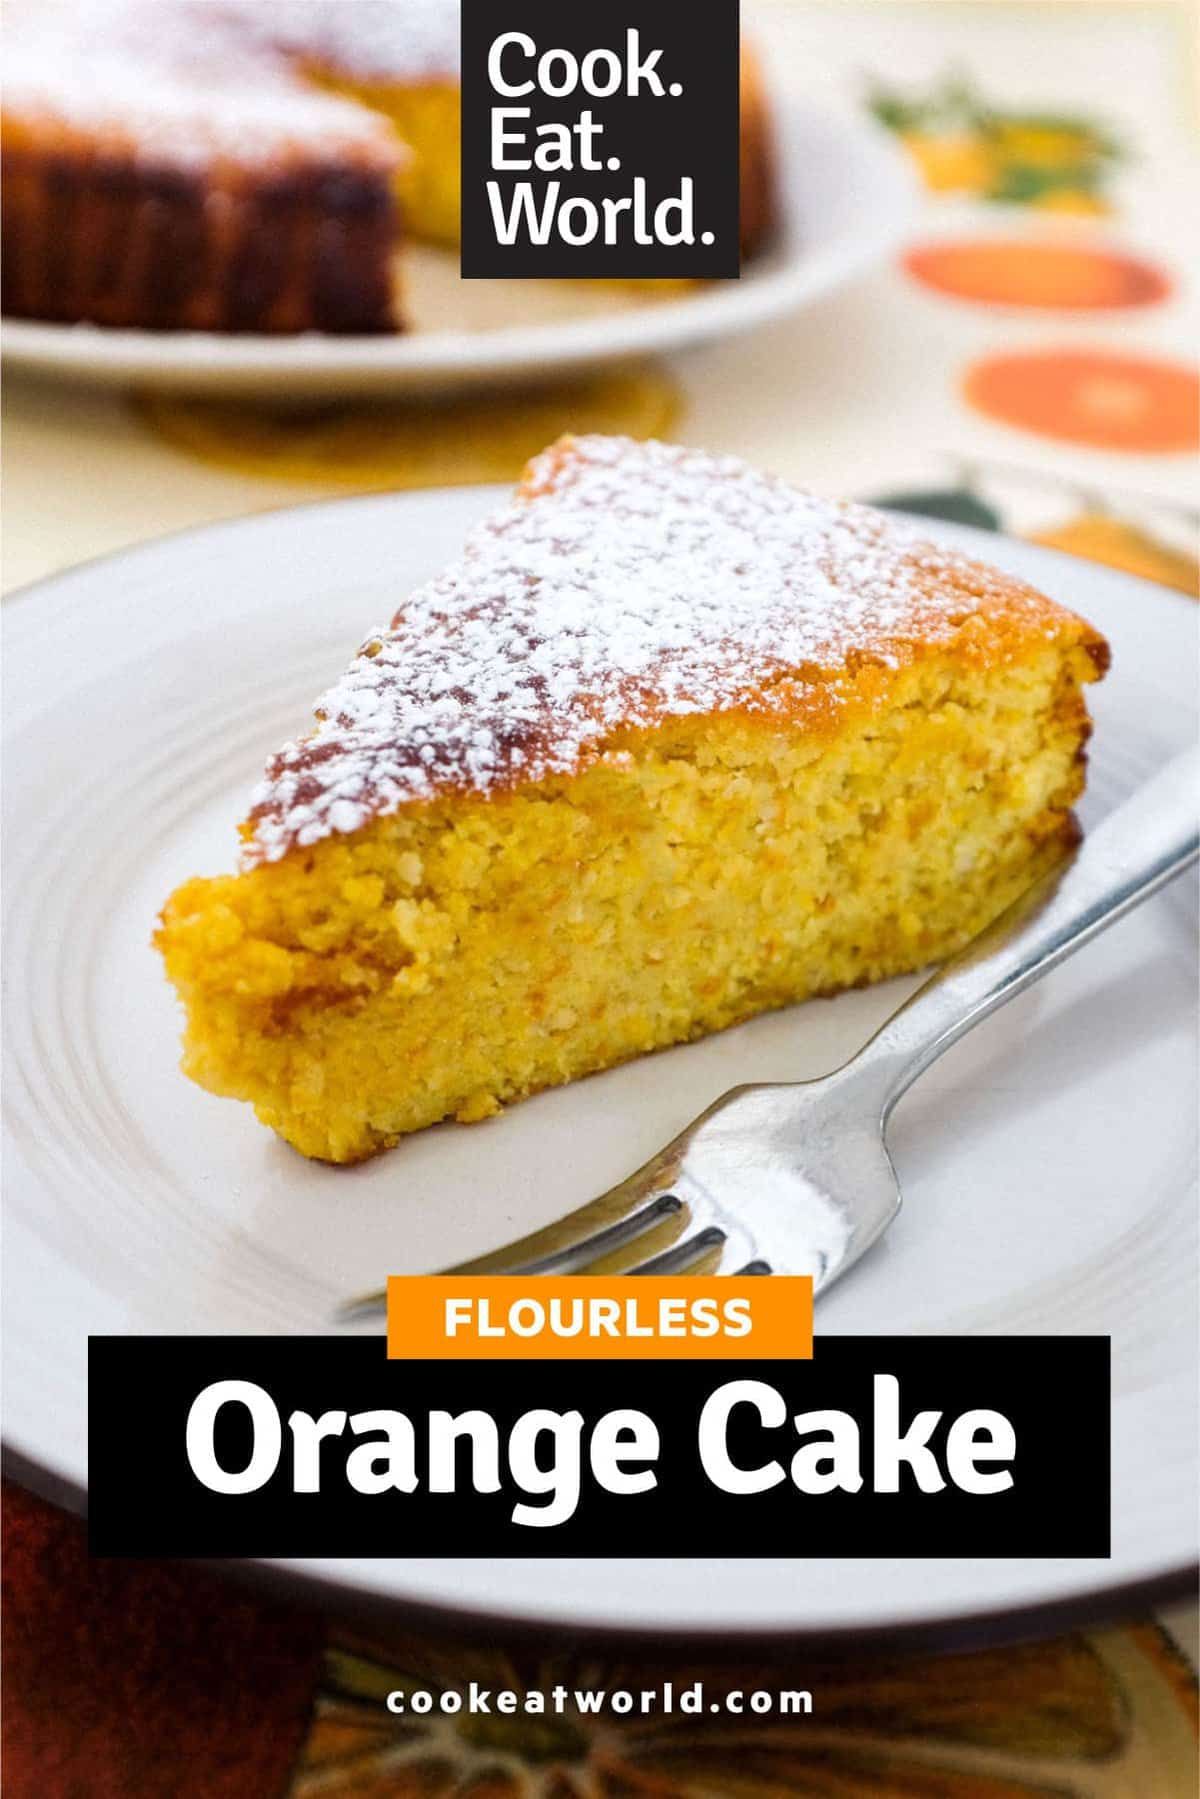 A flourless orange cake, dusted with icing sugar, sits in the foreground with a slice taken out of it. The slice of cake sits in the background out of focus.